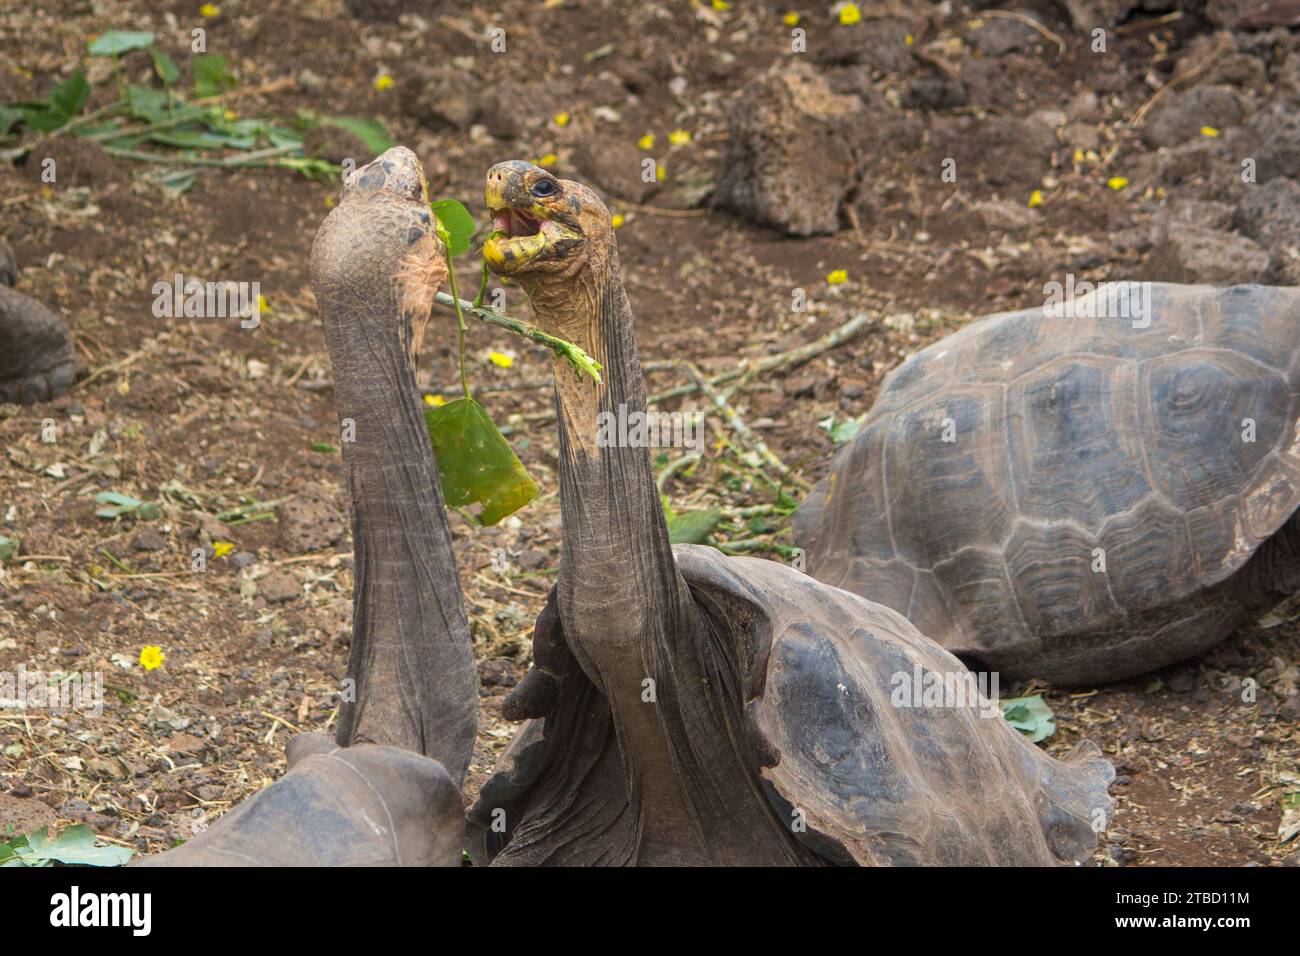 Two Hood Island giant tortoises in a dominance display at Charles Darwin Research Station Stock Photo